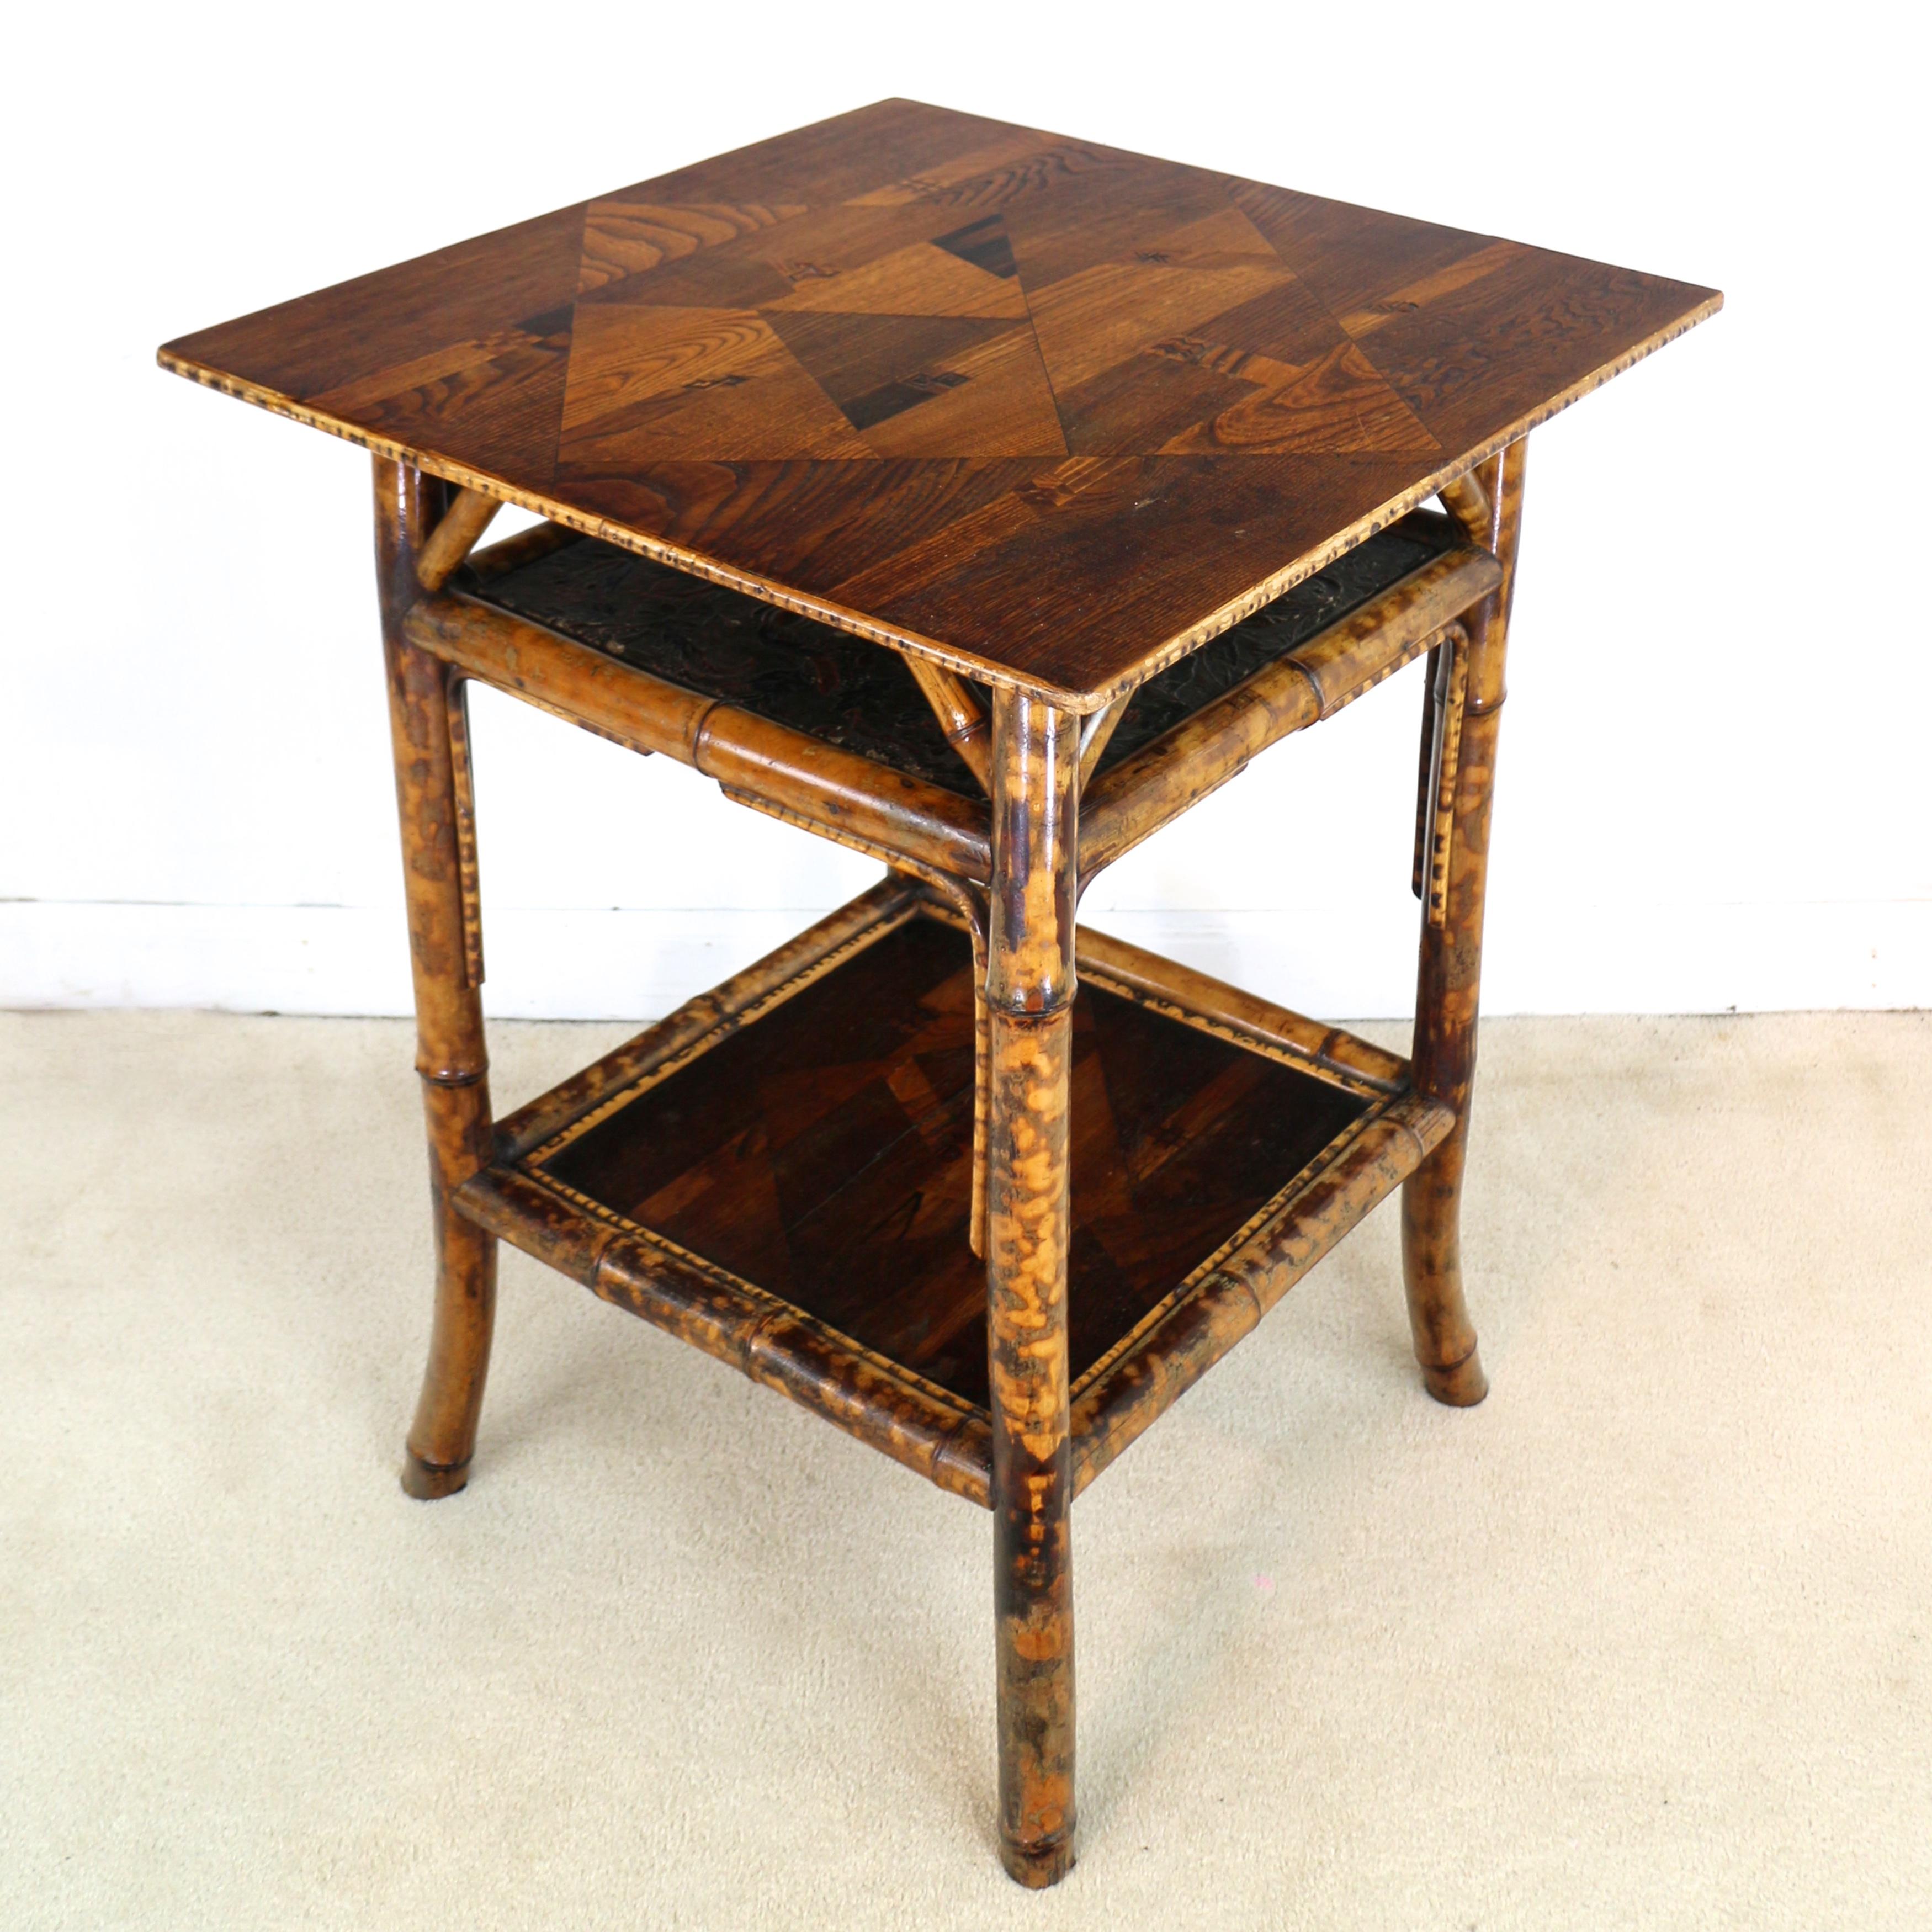 Antique English Victorian Tortoiseshell Bambo Japanese Parquetry Table 4